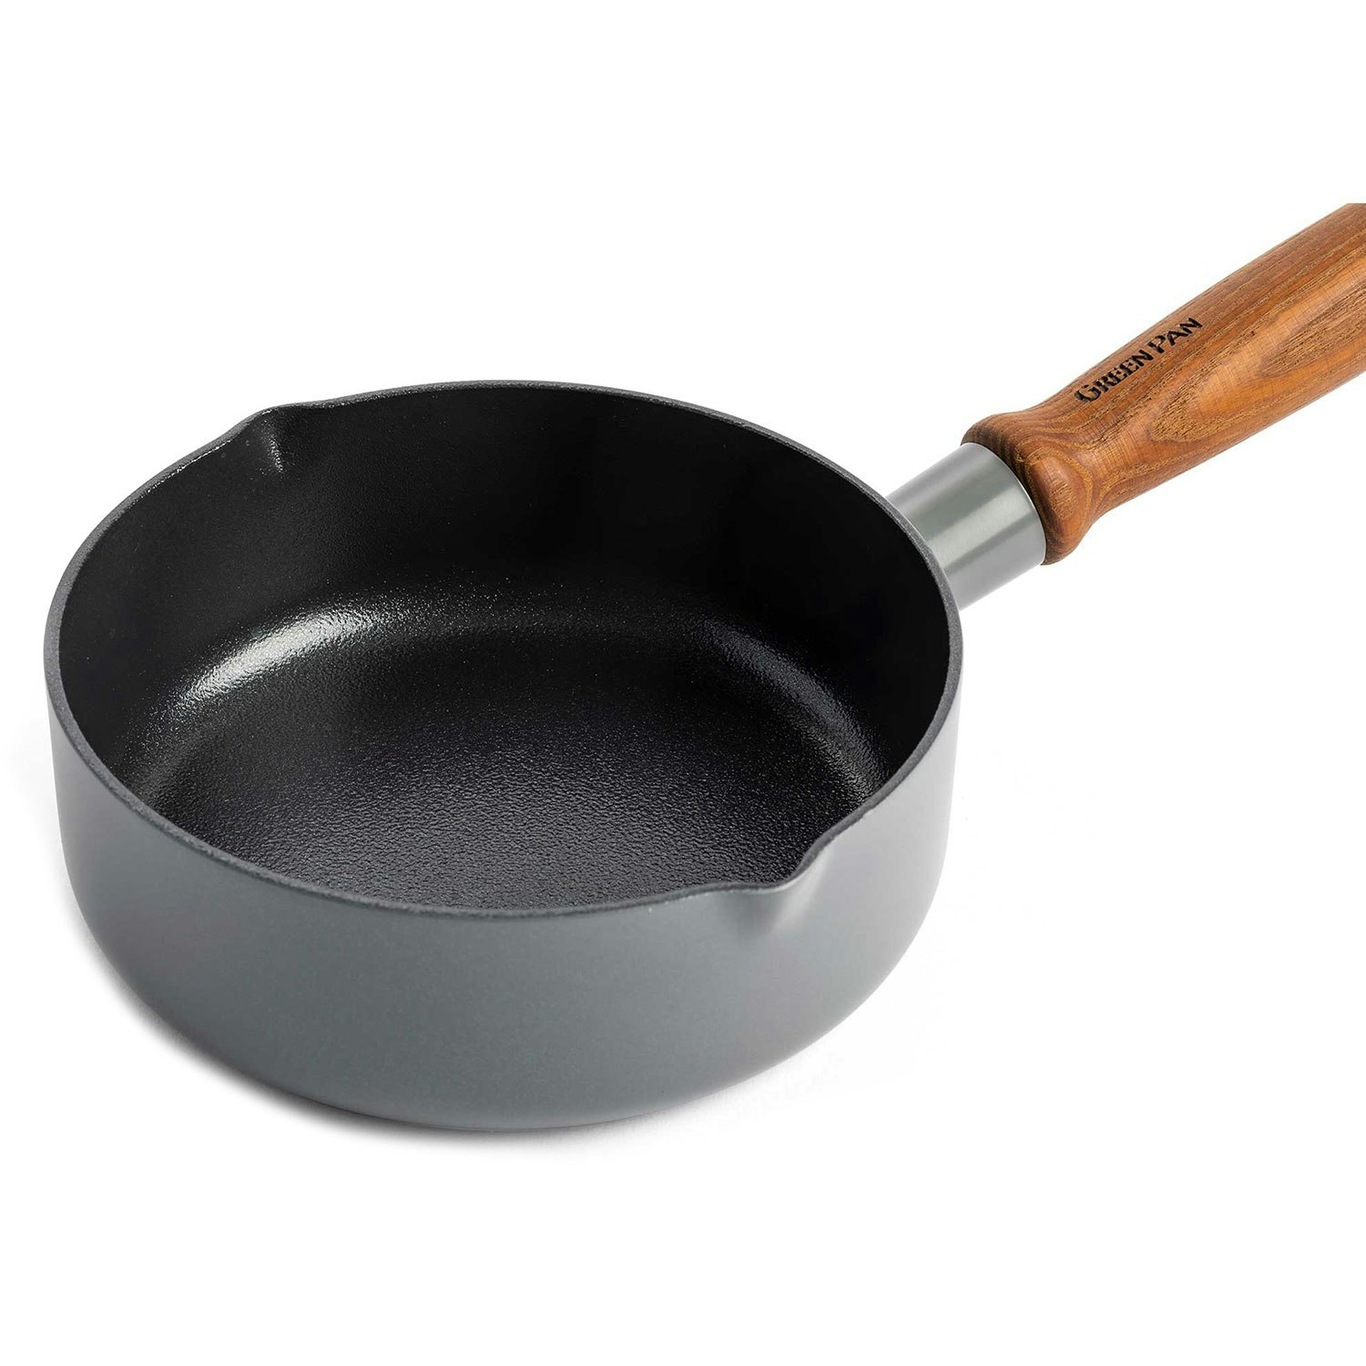 https://royaldesign.com/image/2/greenpan-mayflower-pro-saucepan-with-2-pouring-pipes-0?w=800&quality=80